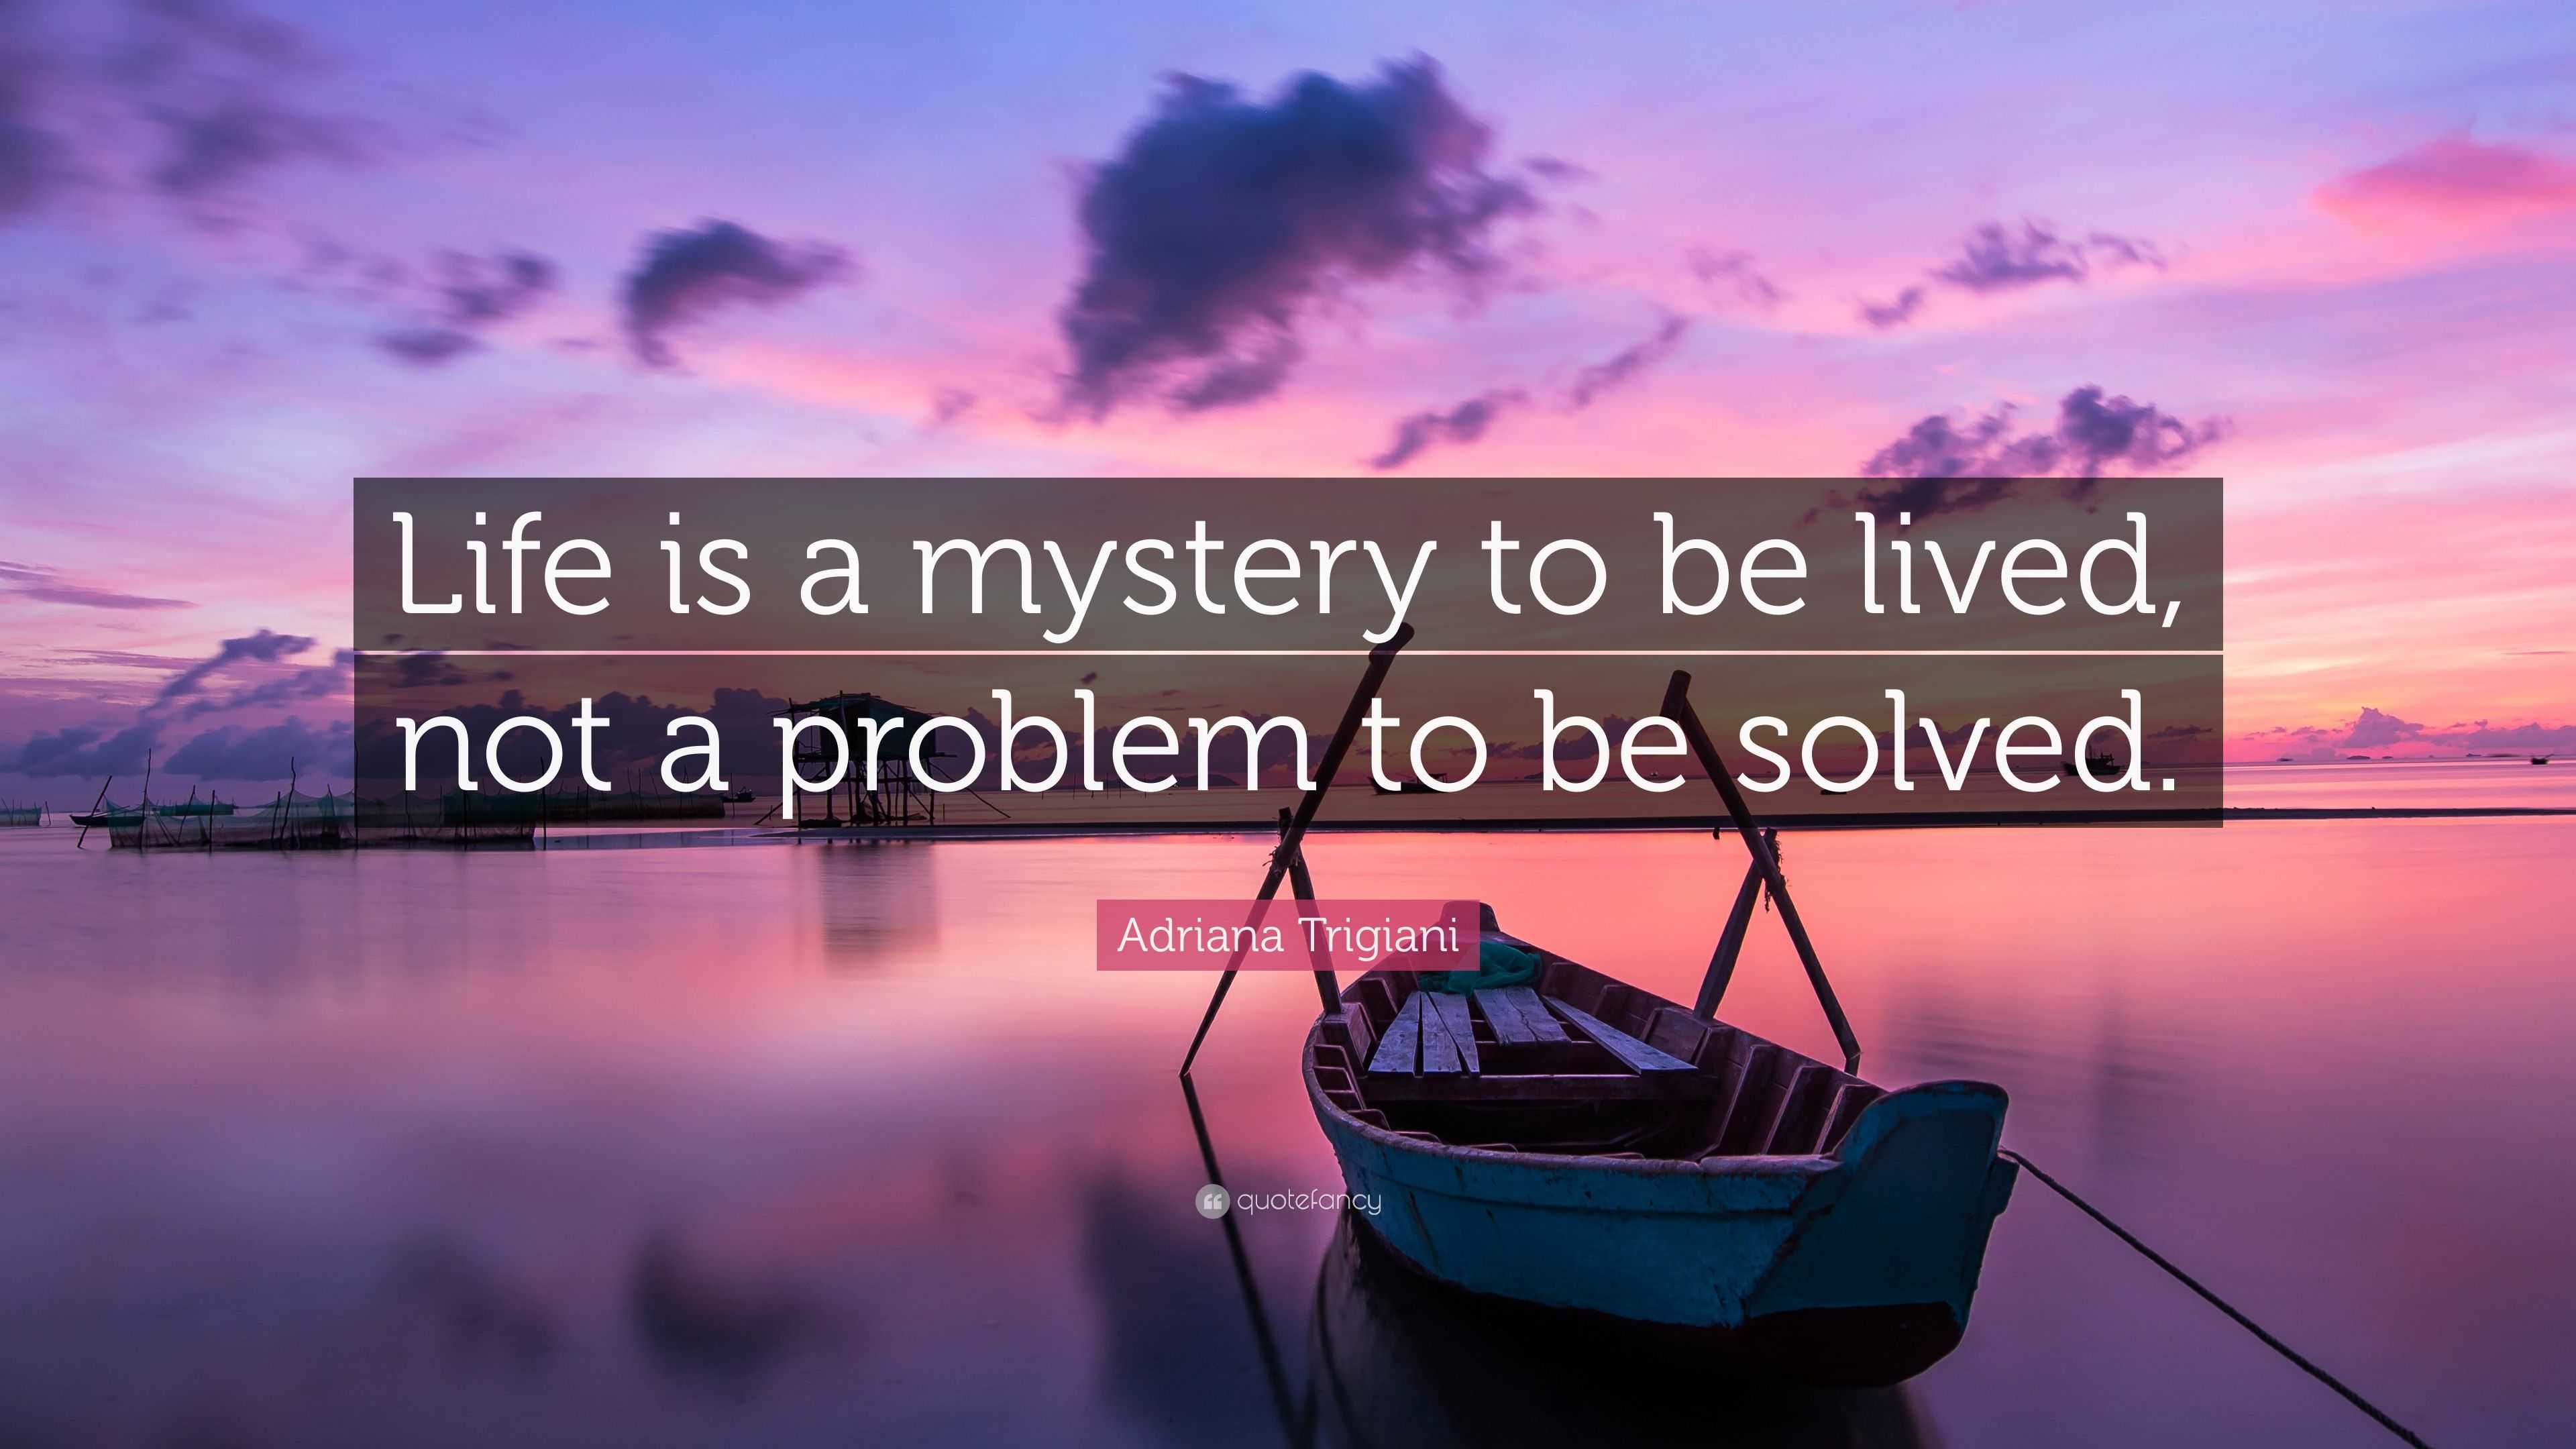 life is an experience to be lived not a problem to be solved